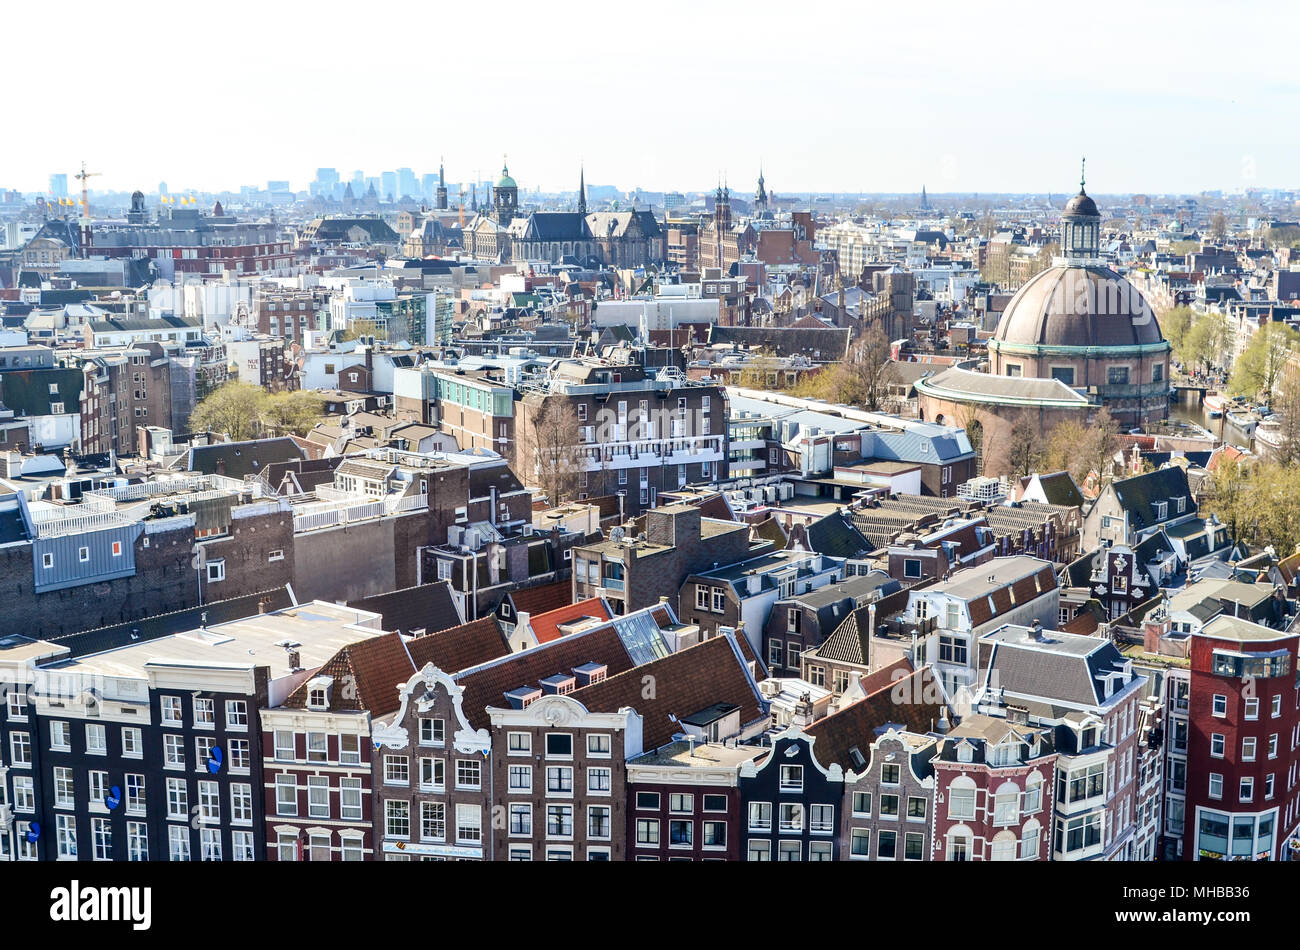 Aerial view of Amsterdam (City center and Jordaan districts), Amsterdam, Netherlands Stock Photo